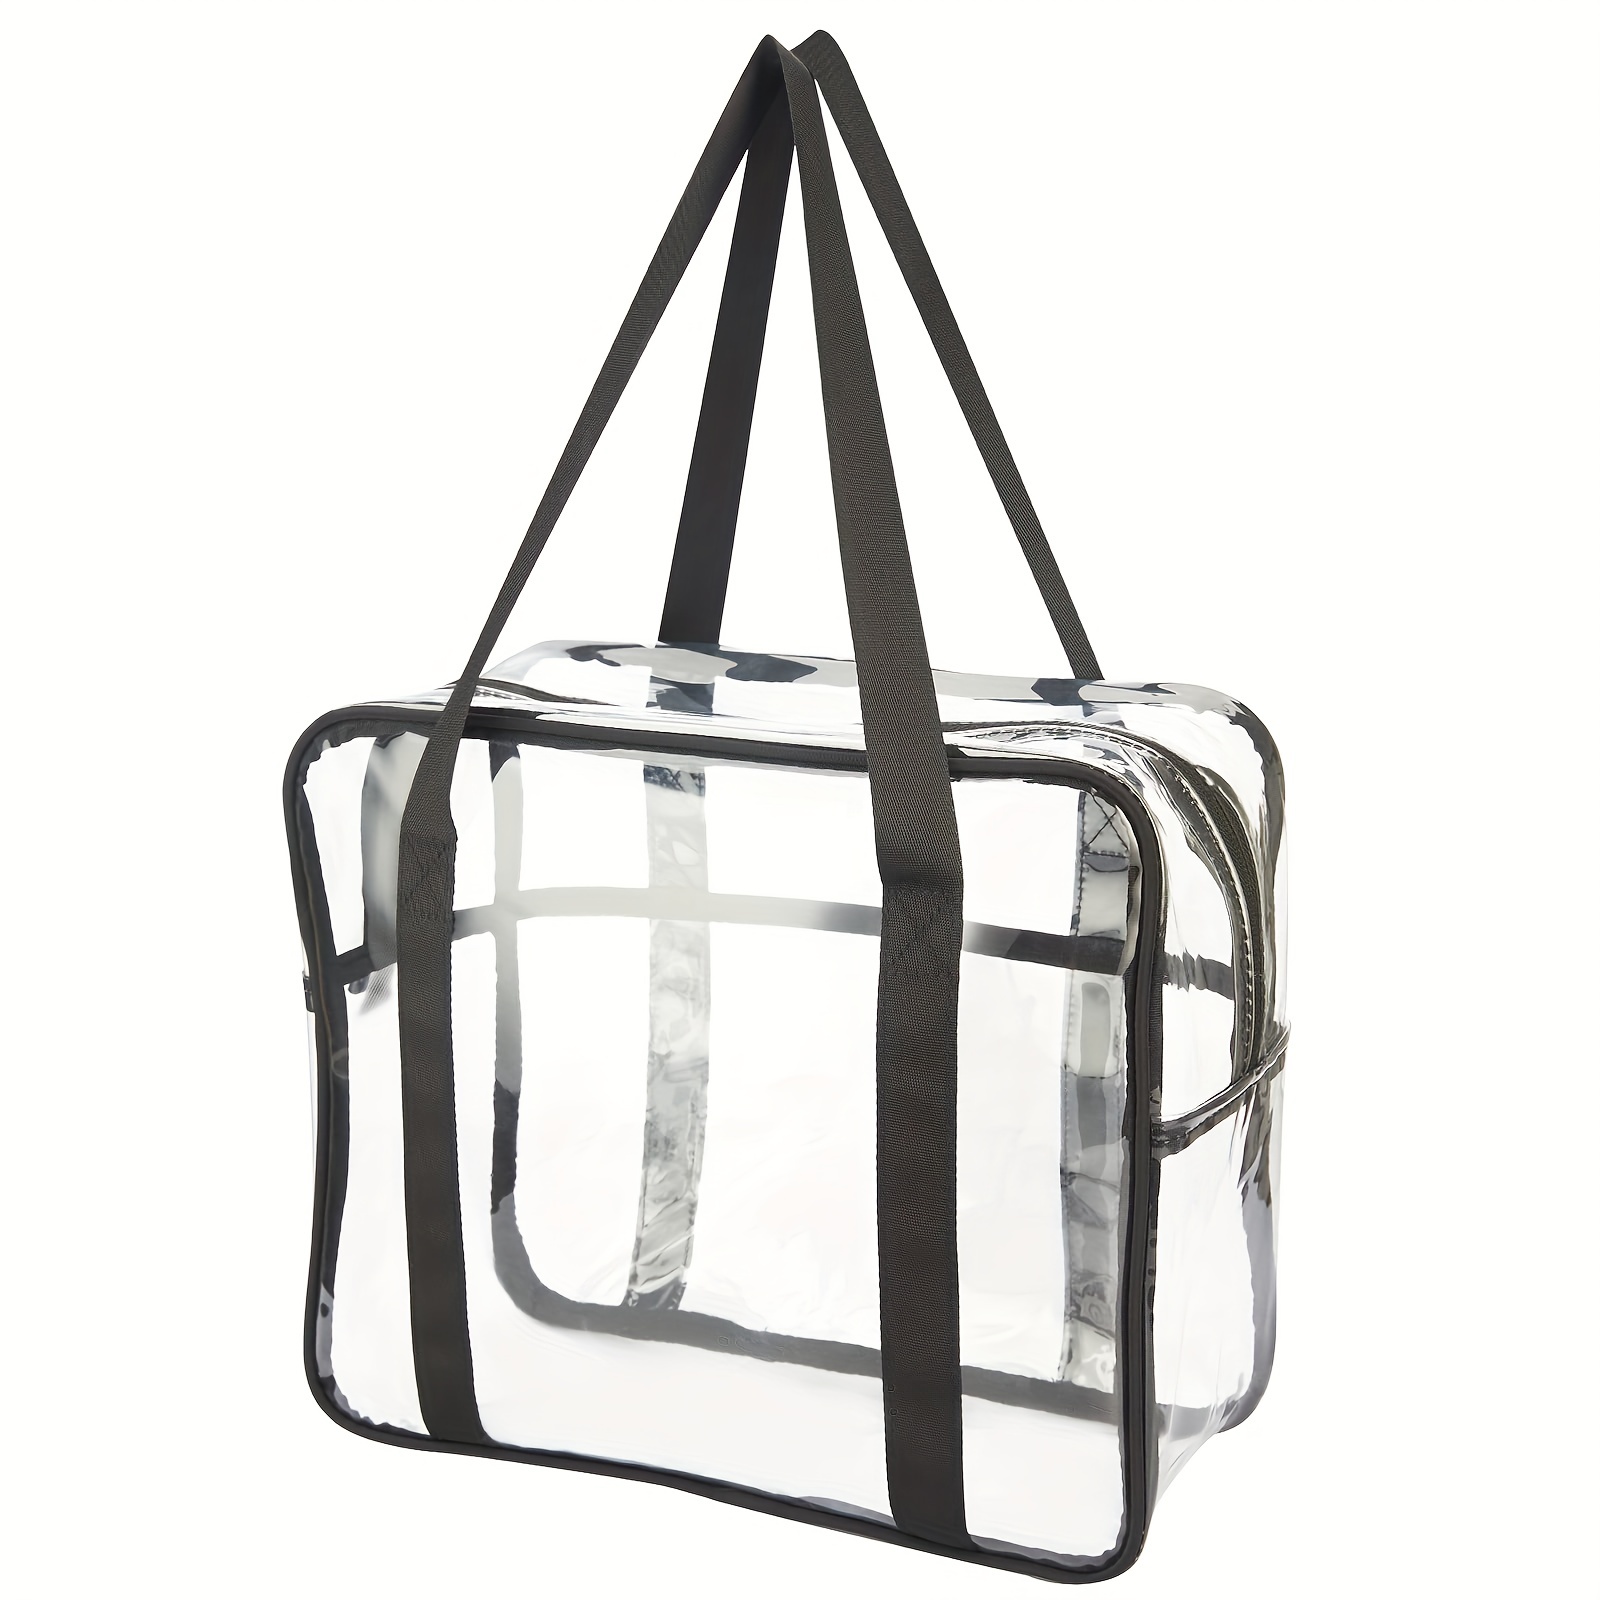 CLEAR VINYL SMALL TOTE BAG – Tammy's Outfitters & Boutique